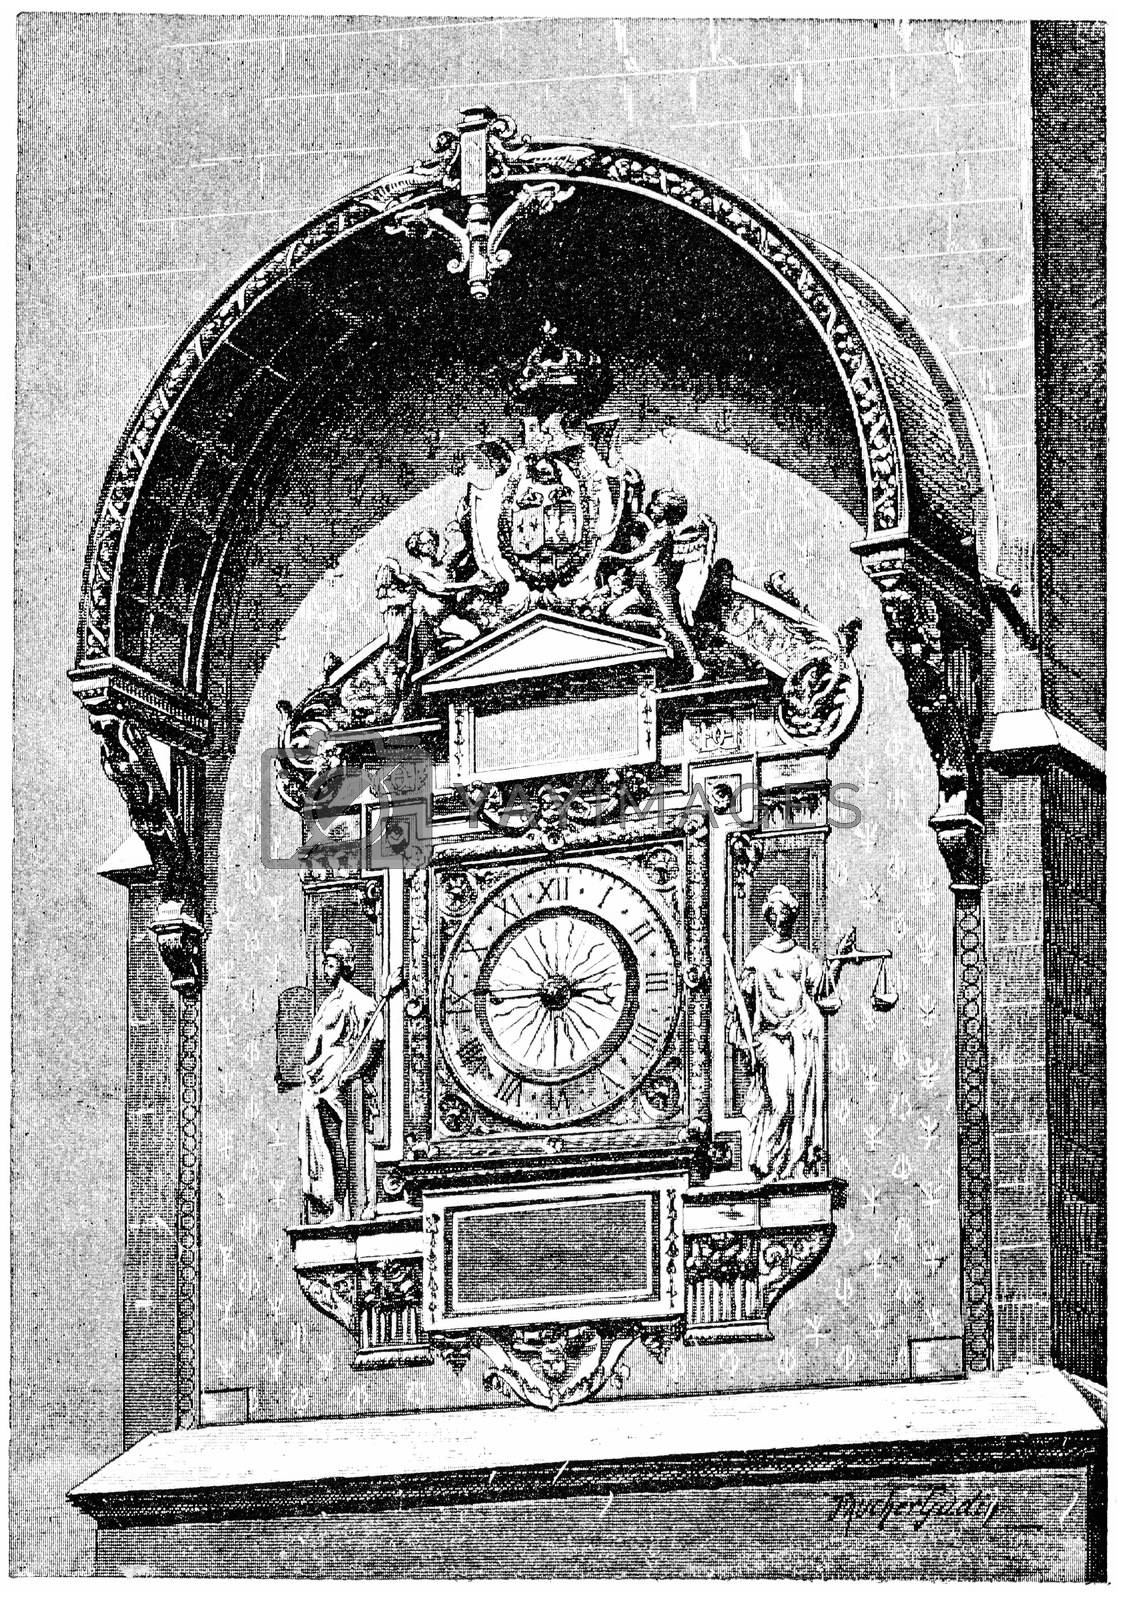 Royalty free image of The clock in the square tower, vintage engraving. by Morphart